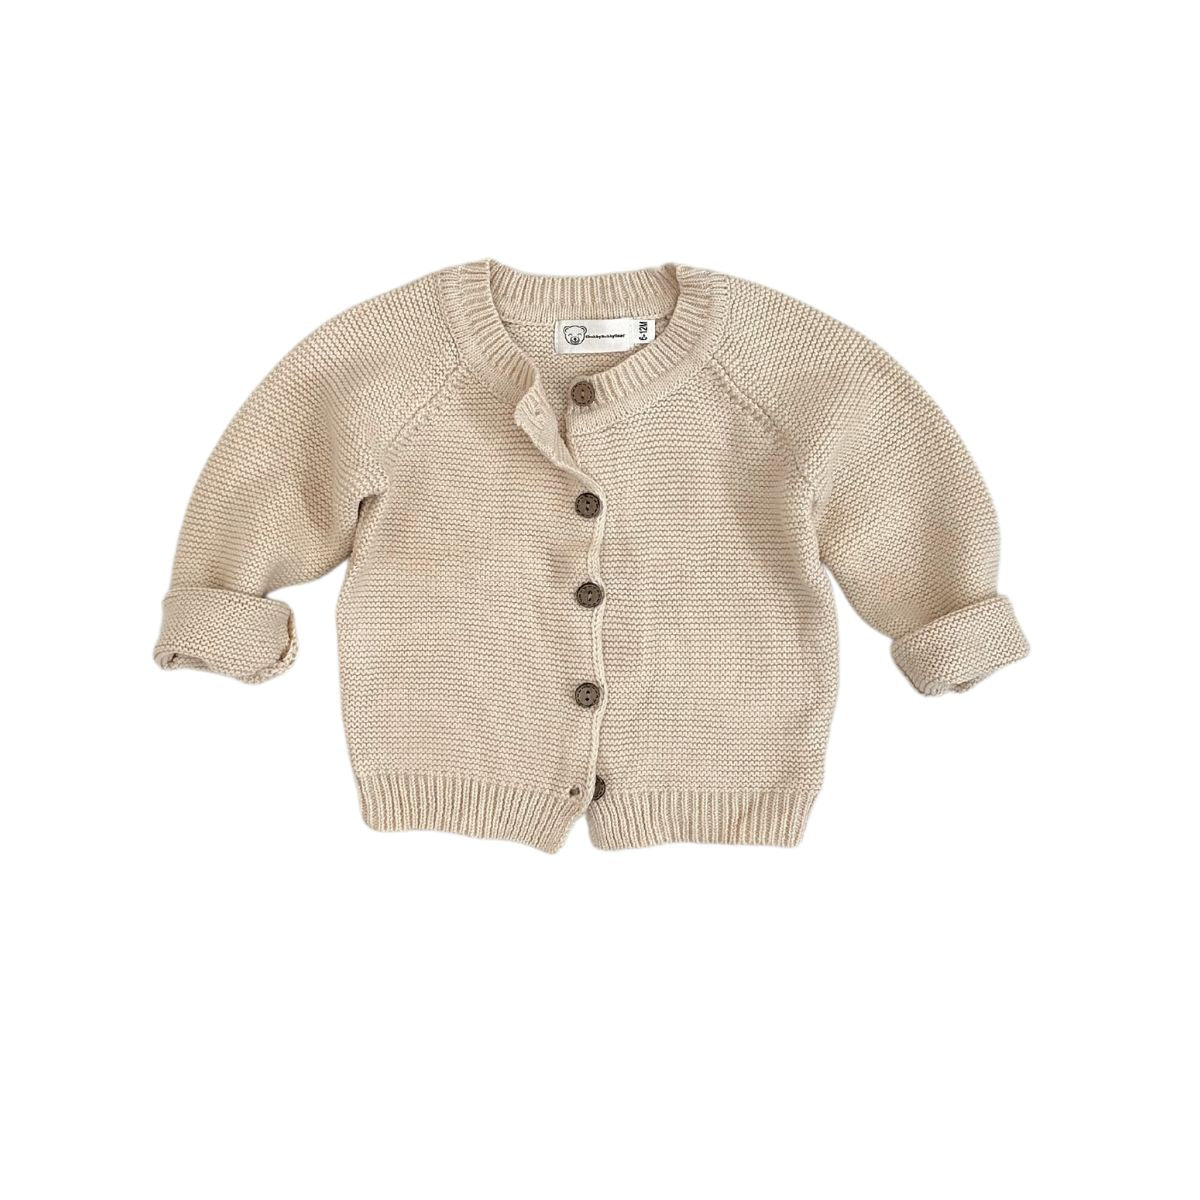 Parker button up sweater in cream